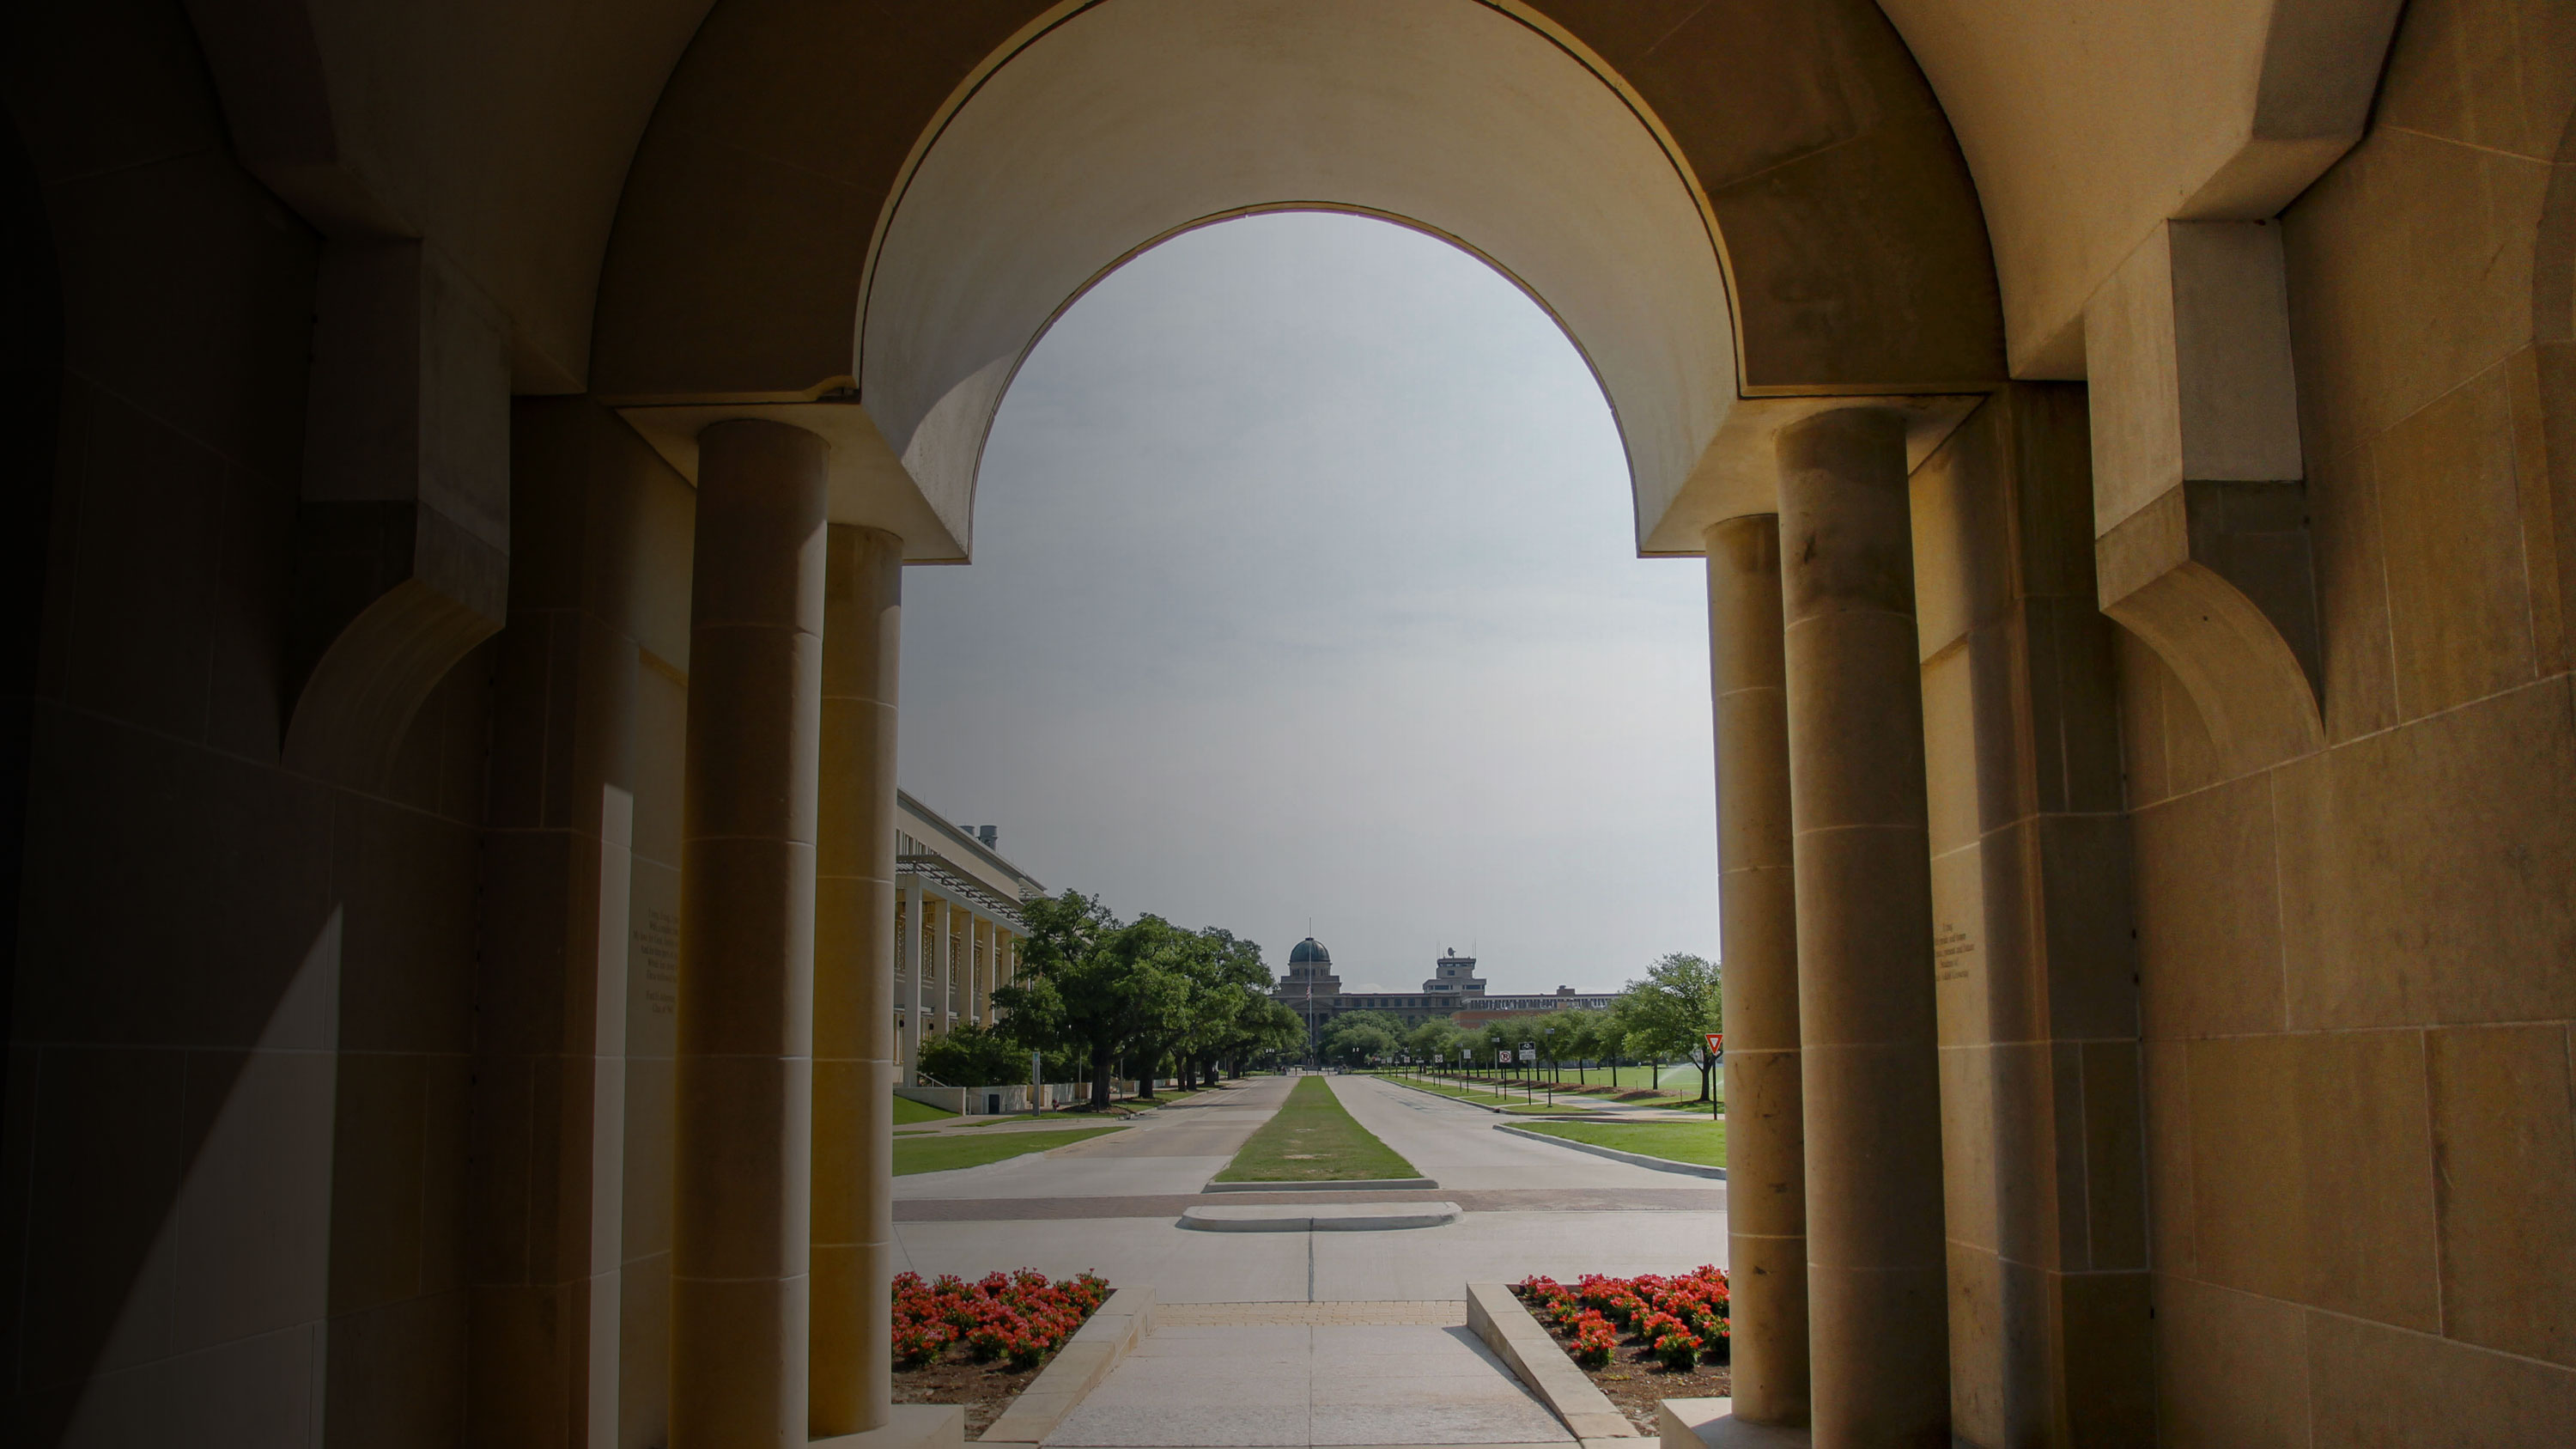 A view of the Texas A&M campus through the clock tower.